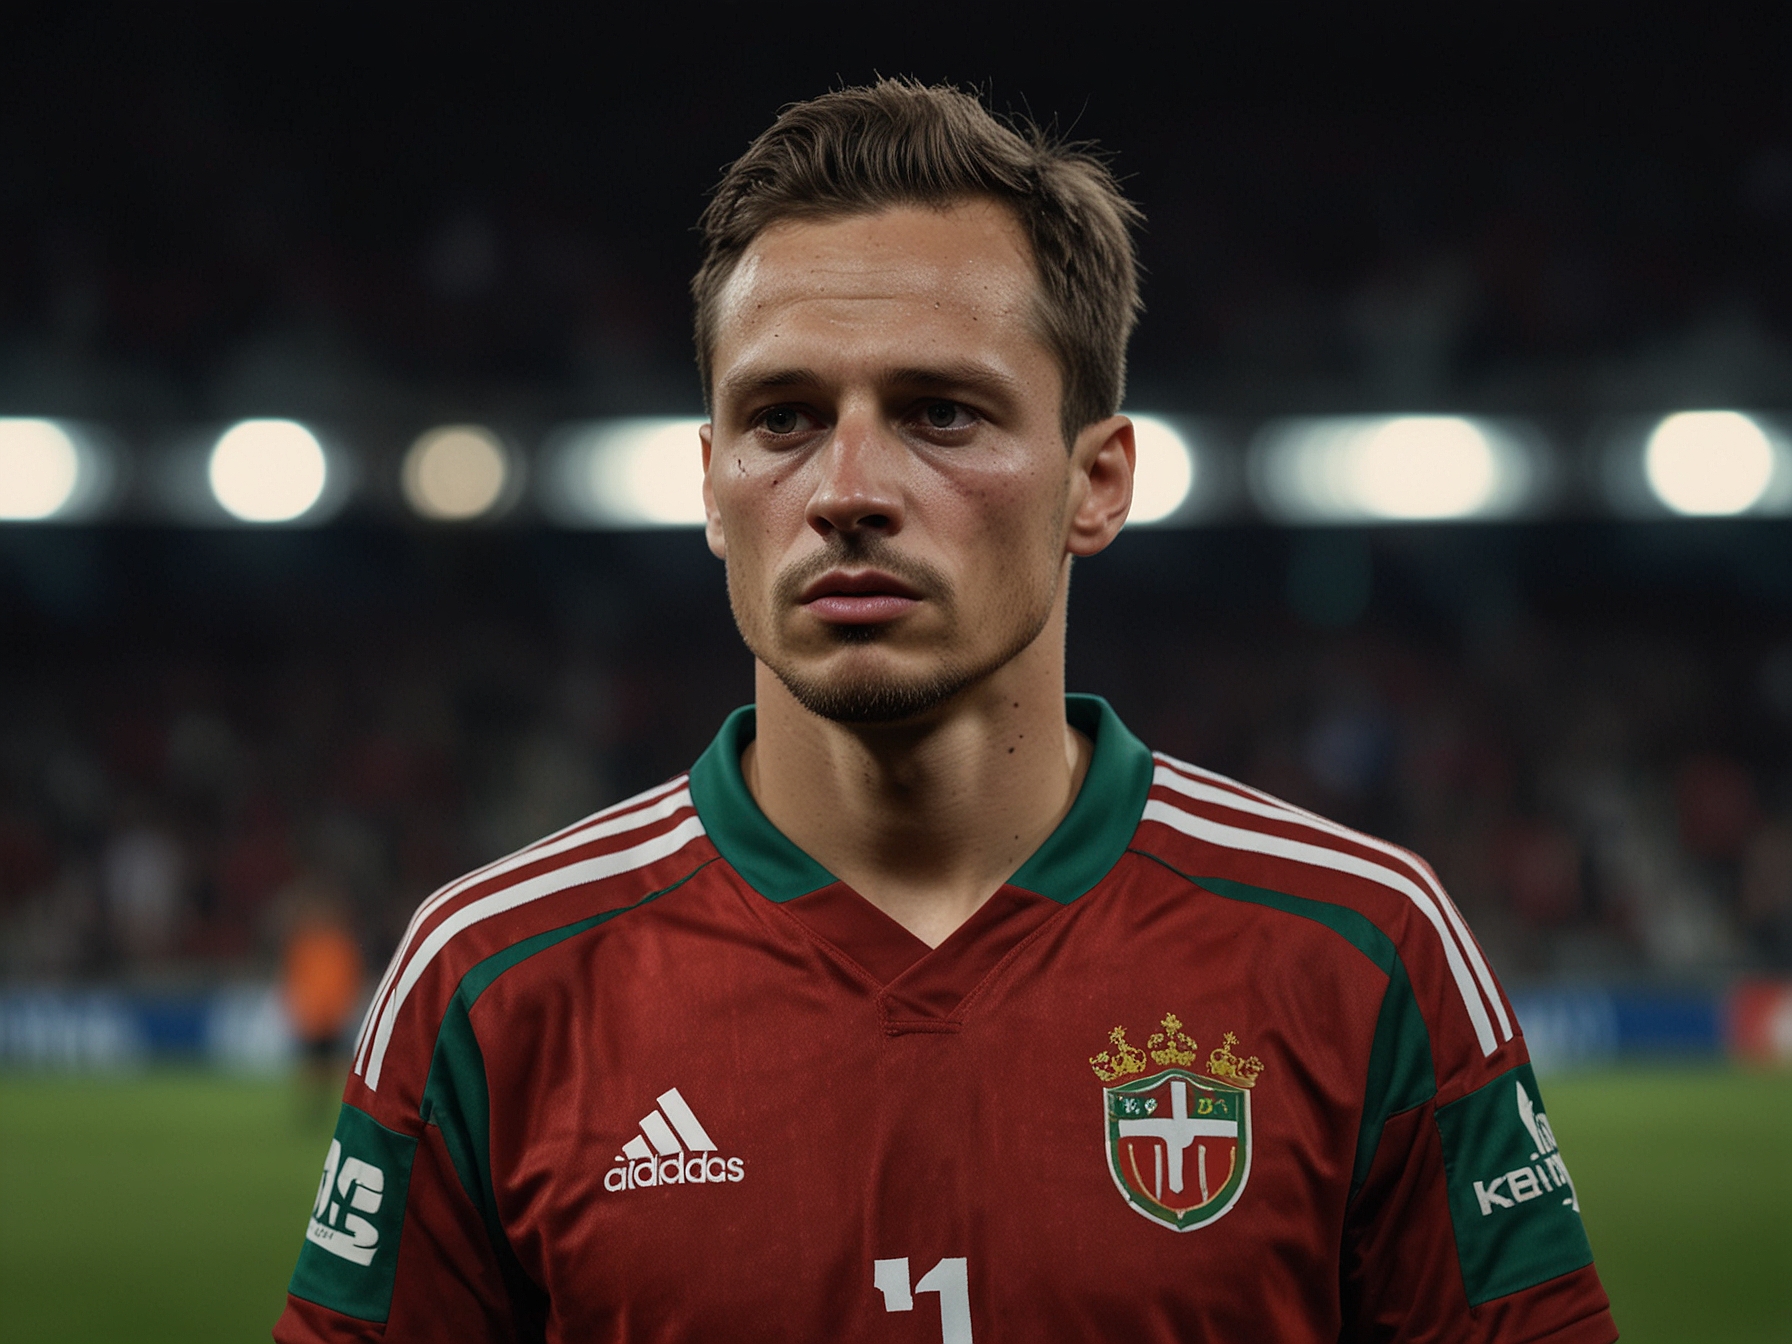 Hungary's captain Dominik Szoboszlai, visibly distressed, walks off the field with tears in his eyes after teammate Barnabas Varga's injury, highlighting the emotional impact of the incident.